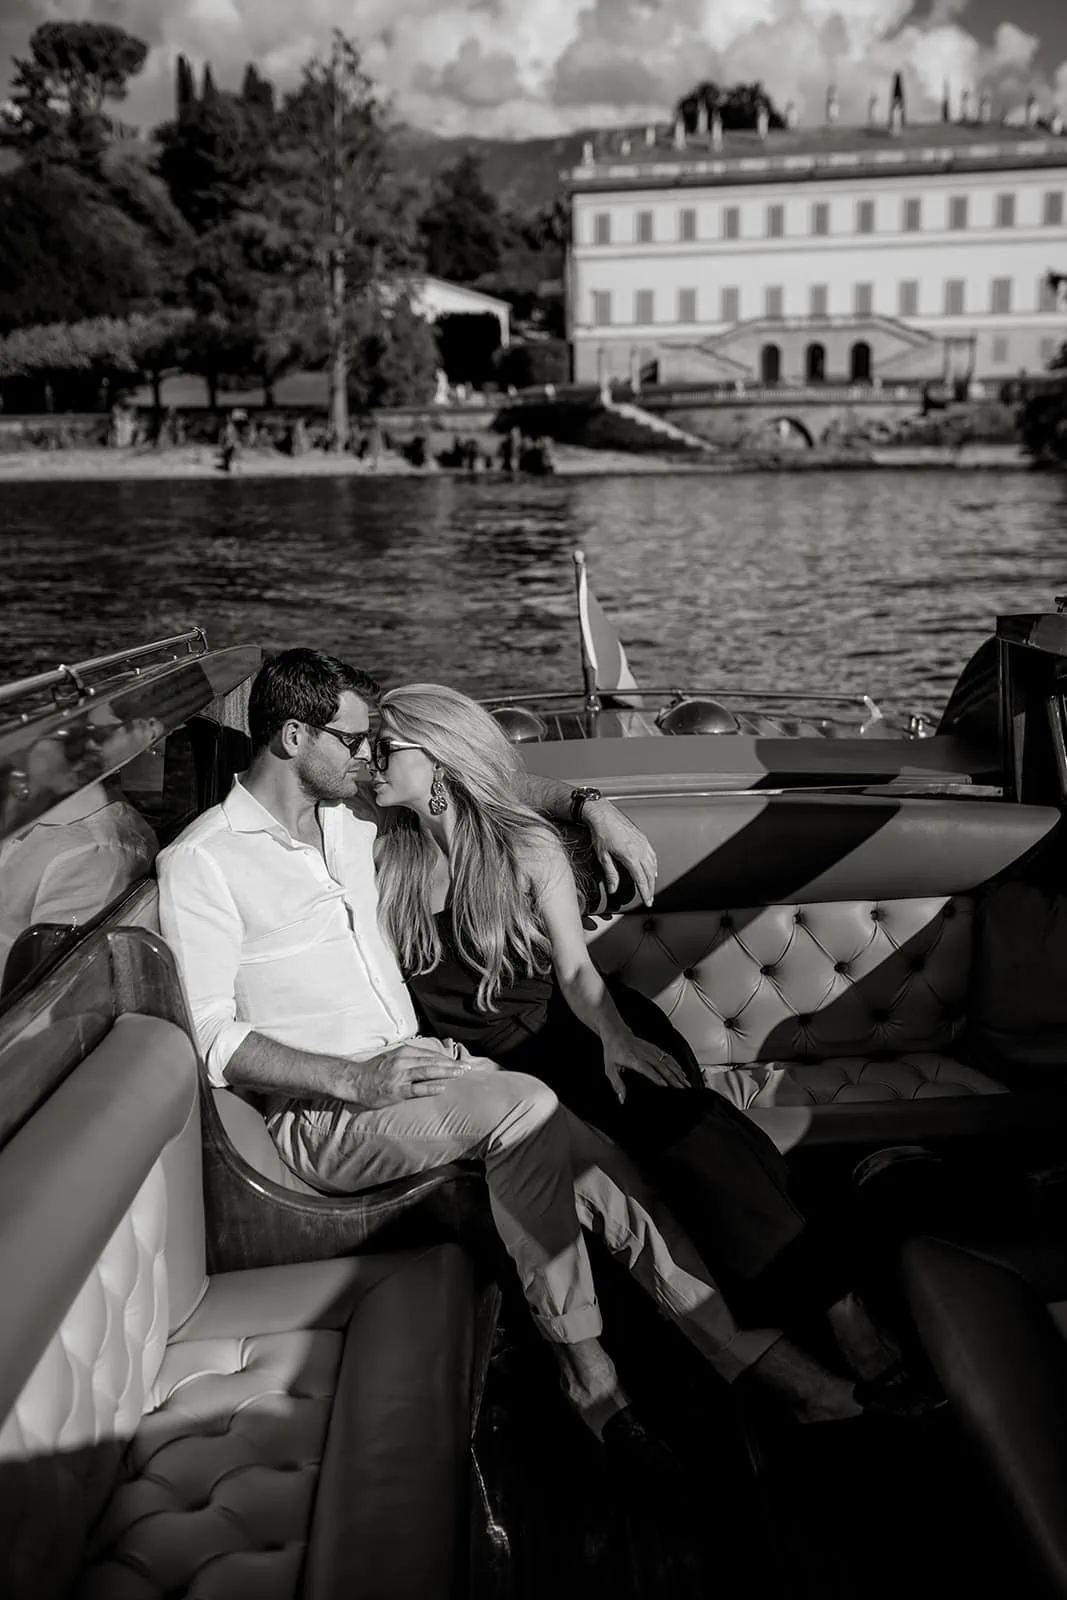 Man and woman on a riva boat on Lake Como with Italian villa in background